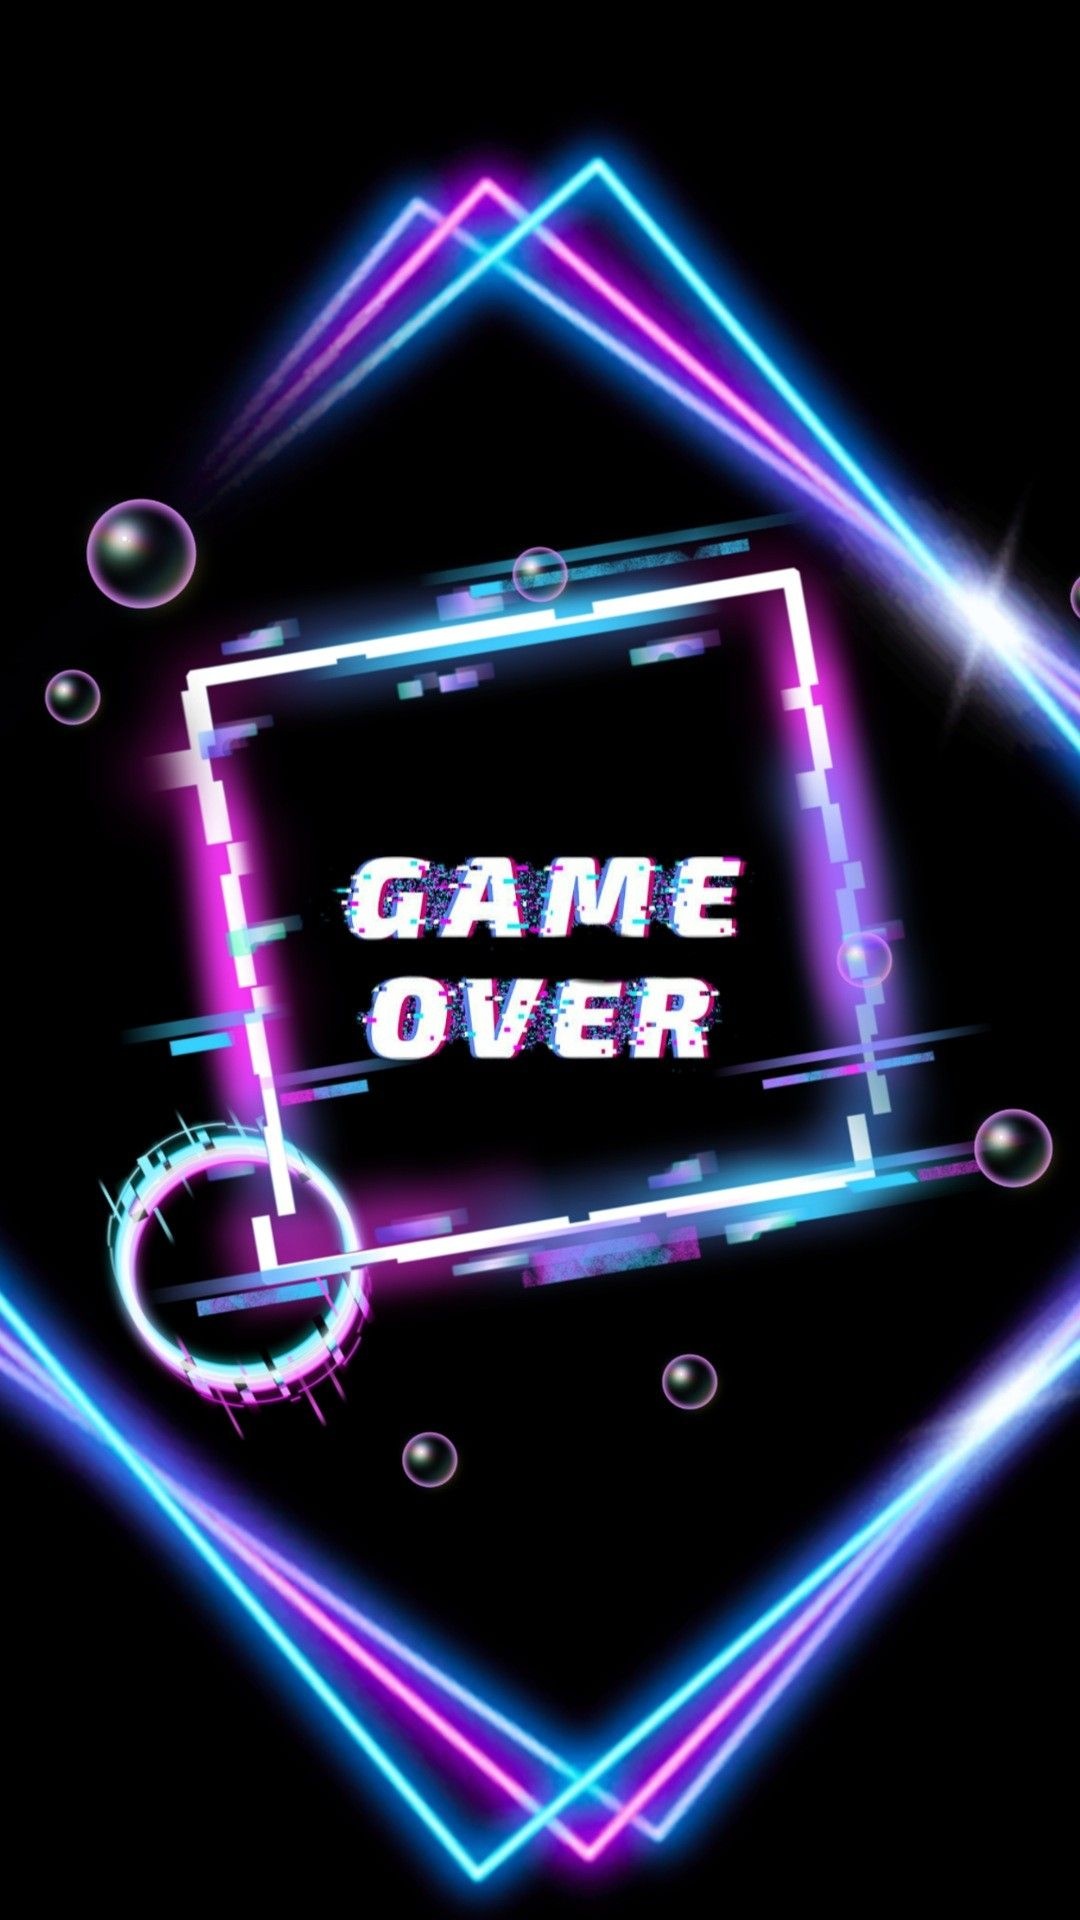 Game Over, Aesthetic wallpaper, Dark and mysterious, Unique, 1080x1920 Full HD Handy